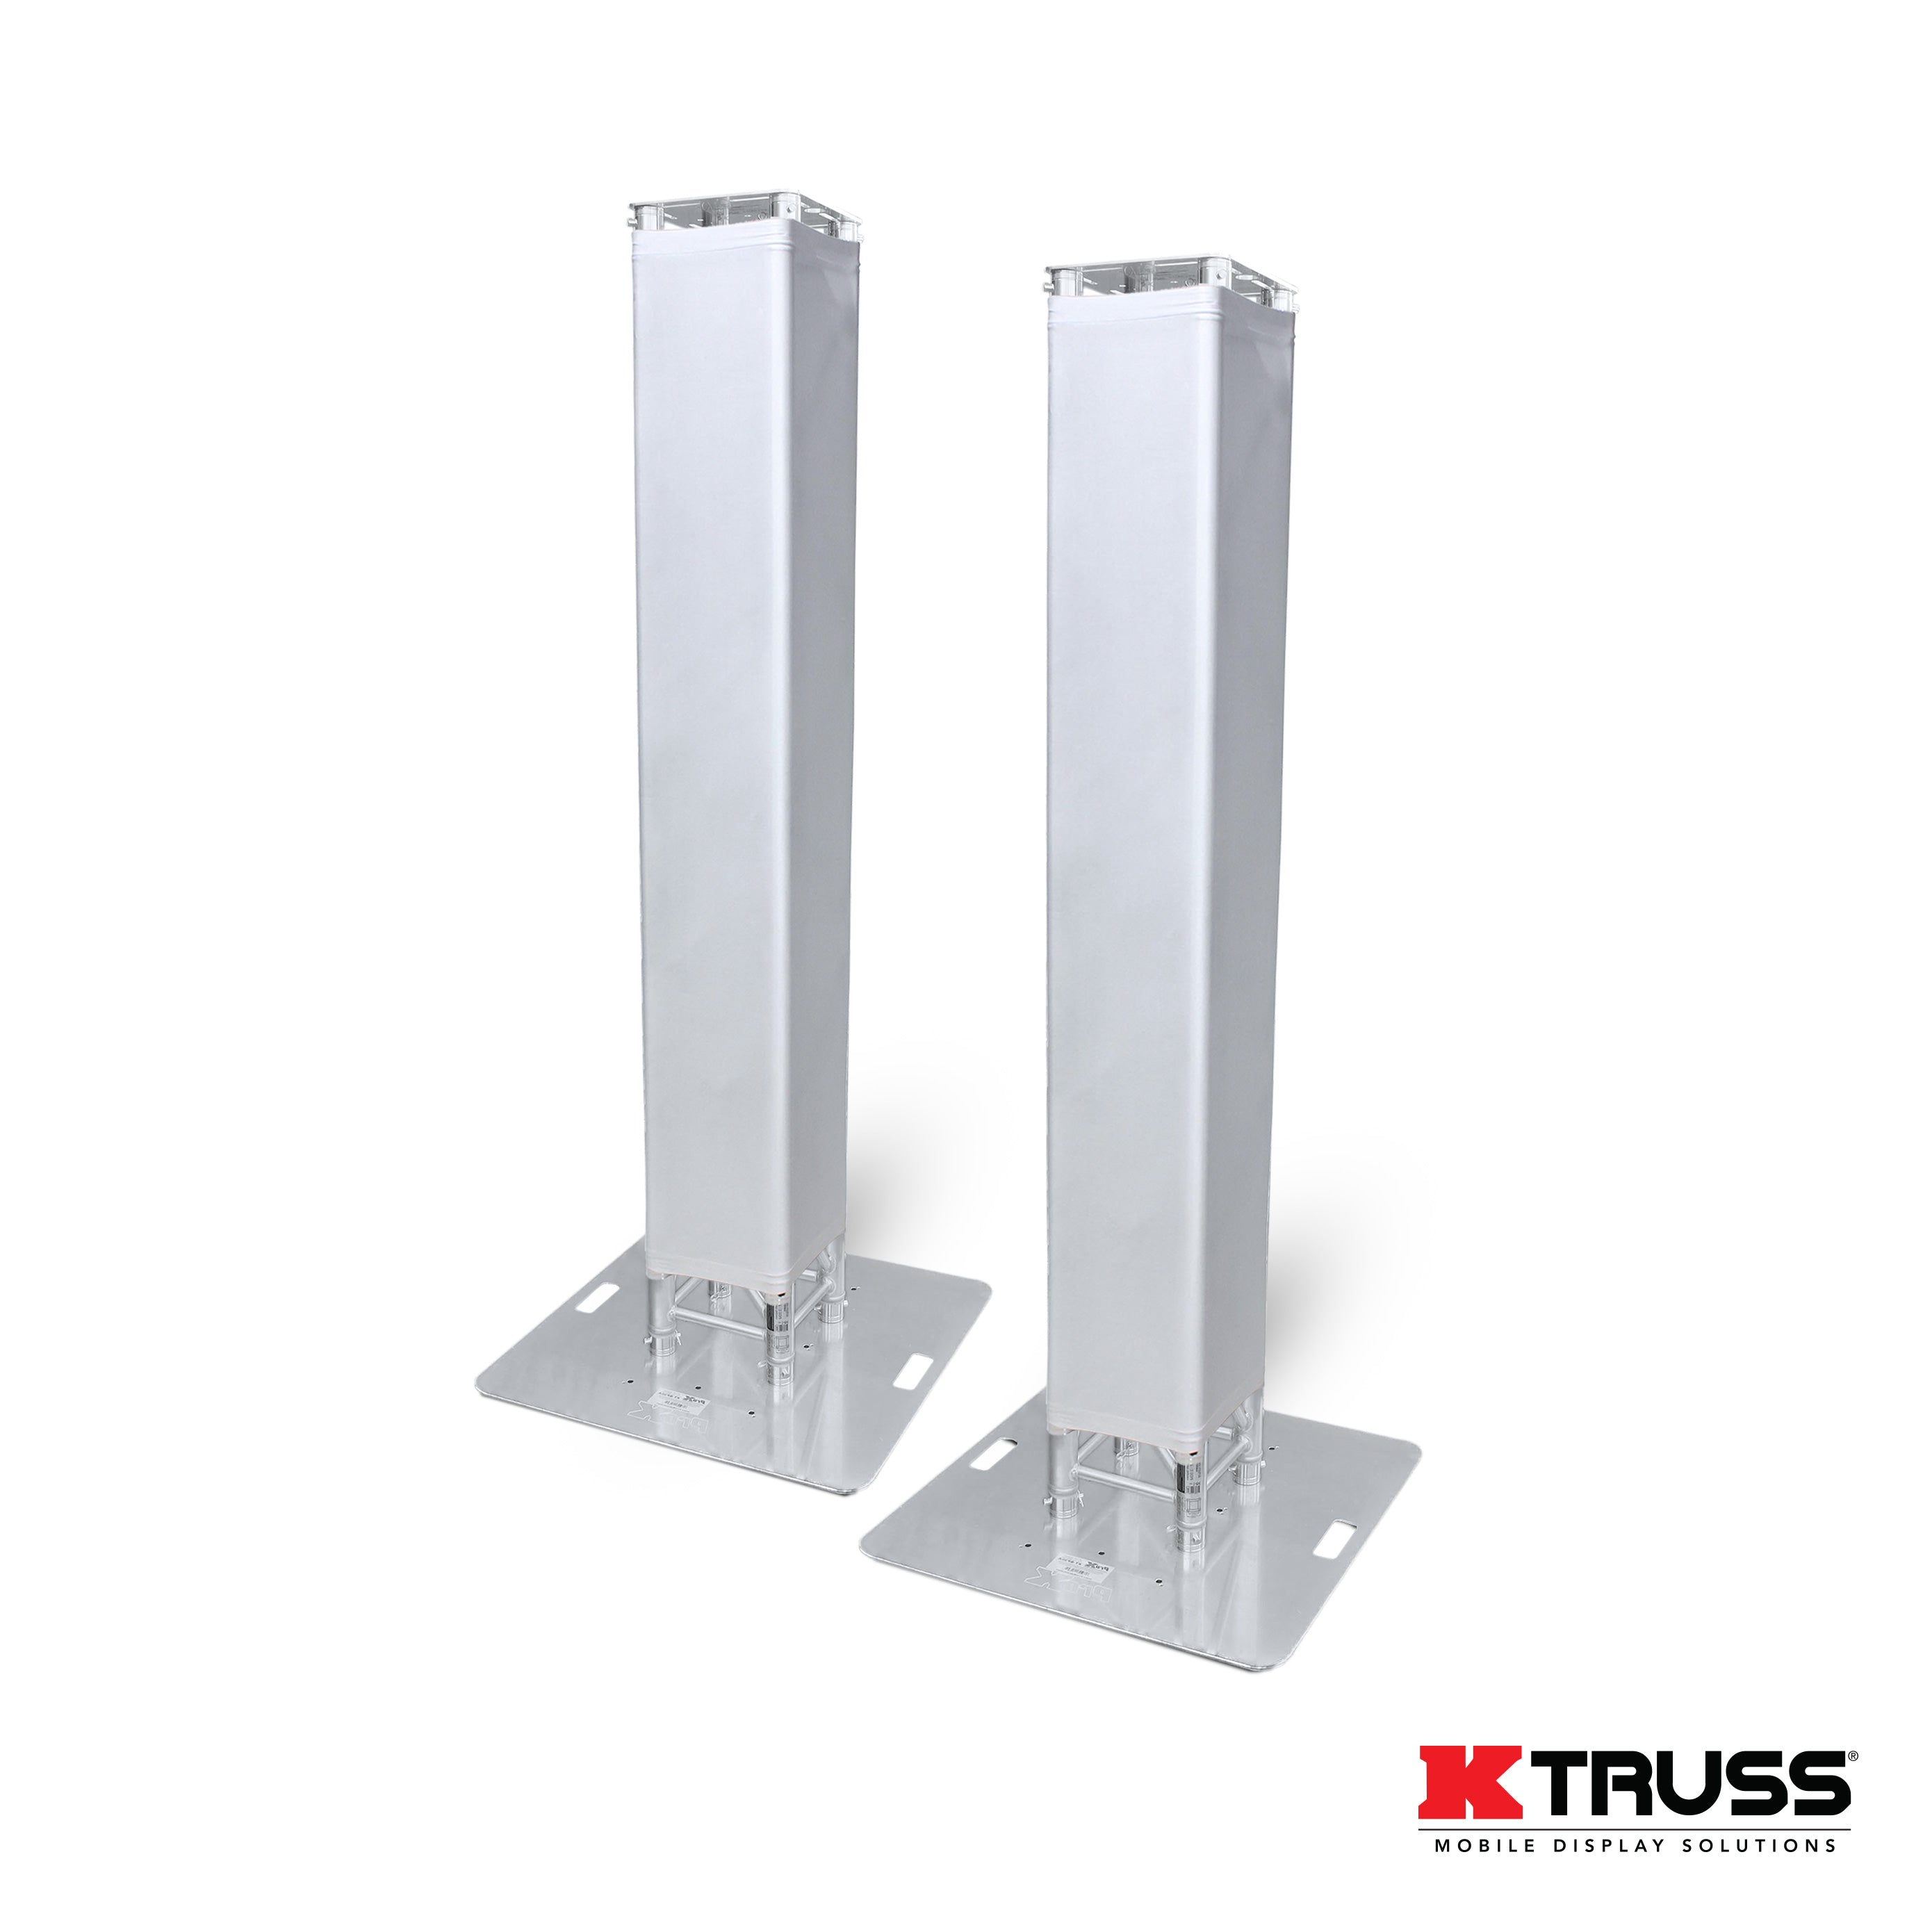 Pro X K-Truss 4.92 Lightweight Square Truss Totem Full Package Includes White Scrim, Top Plate and Base Plate KT-SQ492TOTEMTCX2